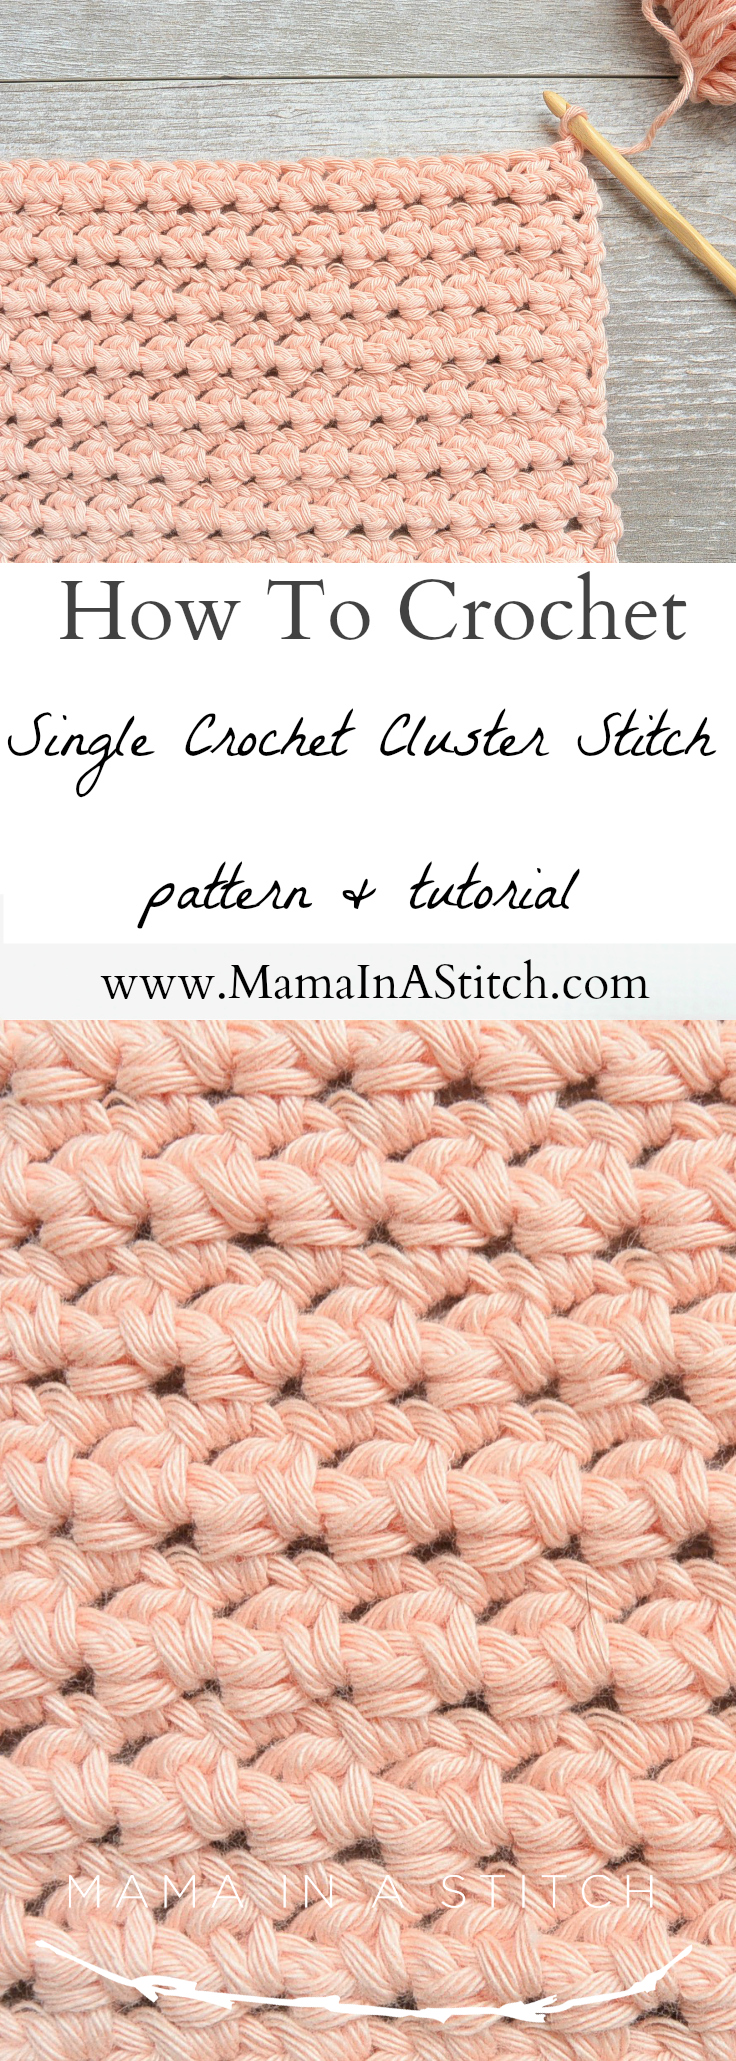 How To Crochet the Single Crochet Cluster Stitch – Mama In A Stitch